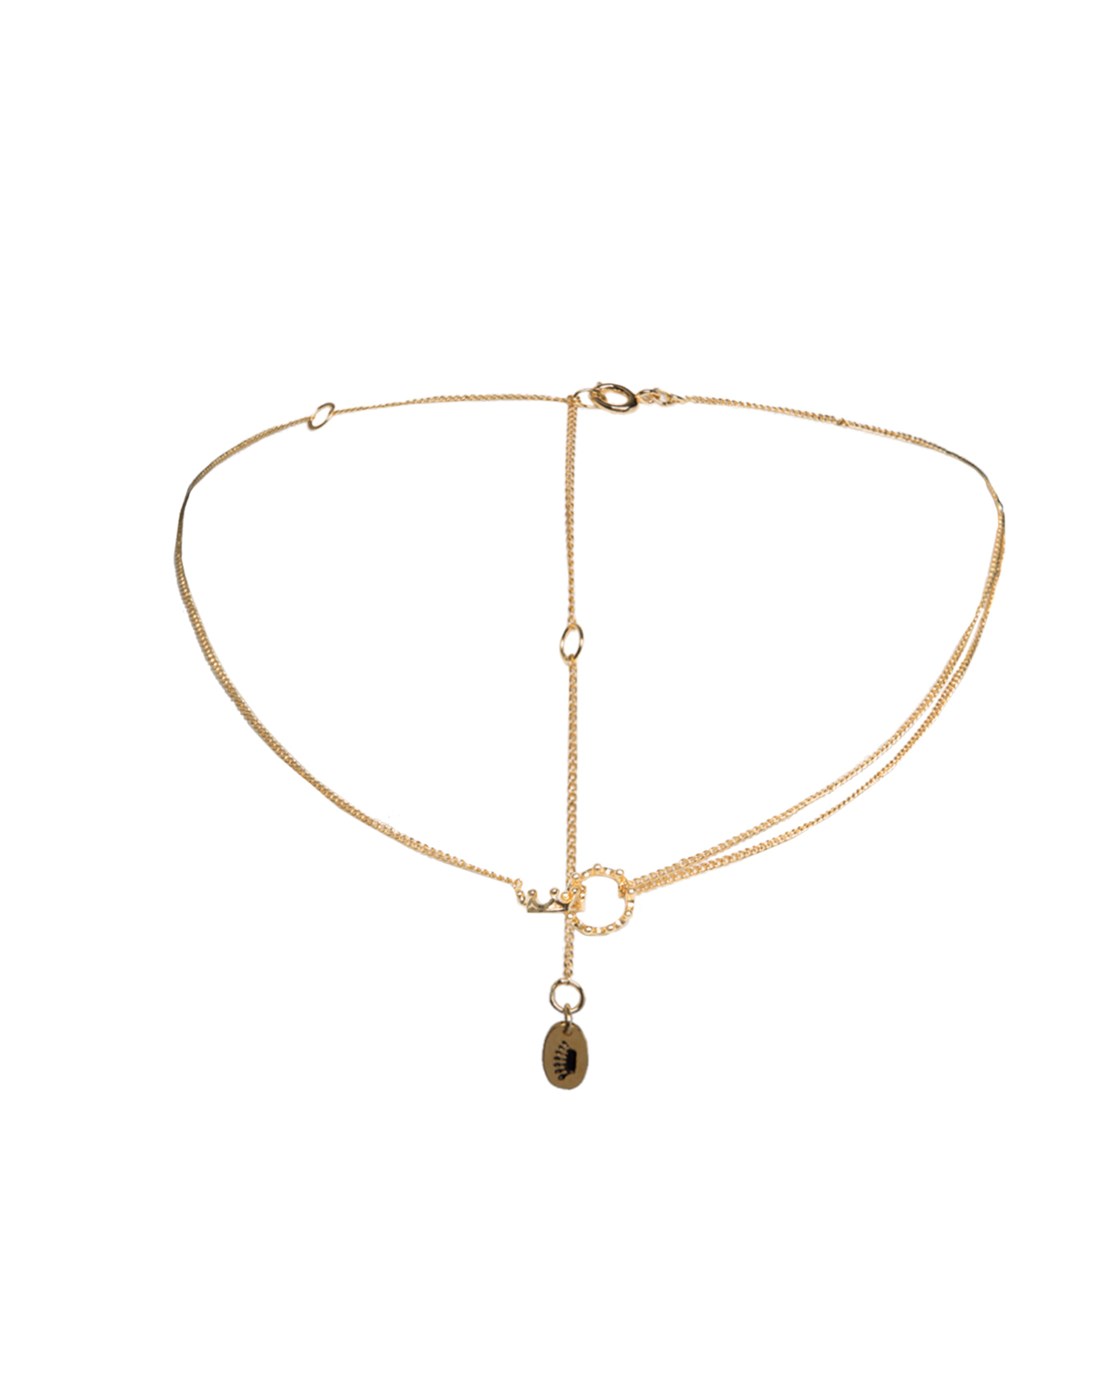 Juicy Couture Linked Crown Expressions Necklace